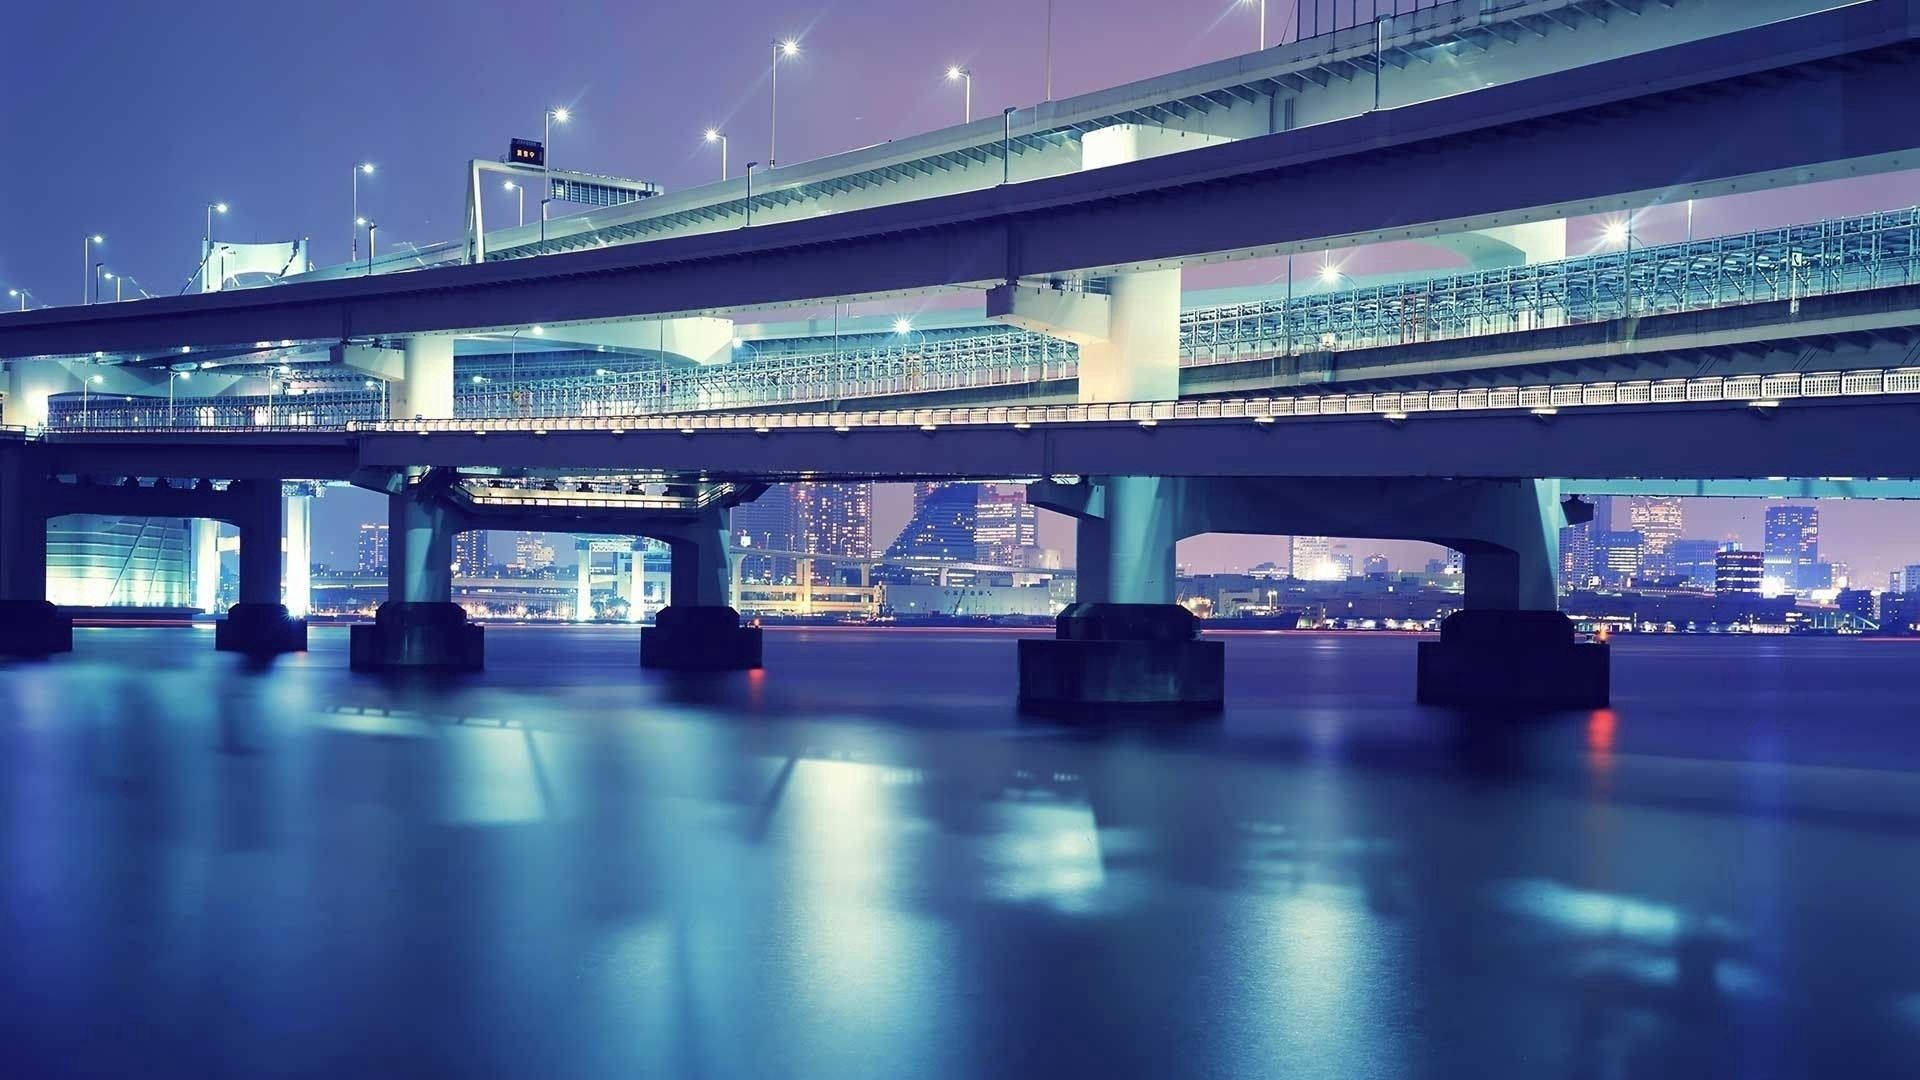 1920X1080 Tokyo Wallpaper and Background